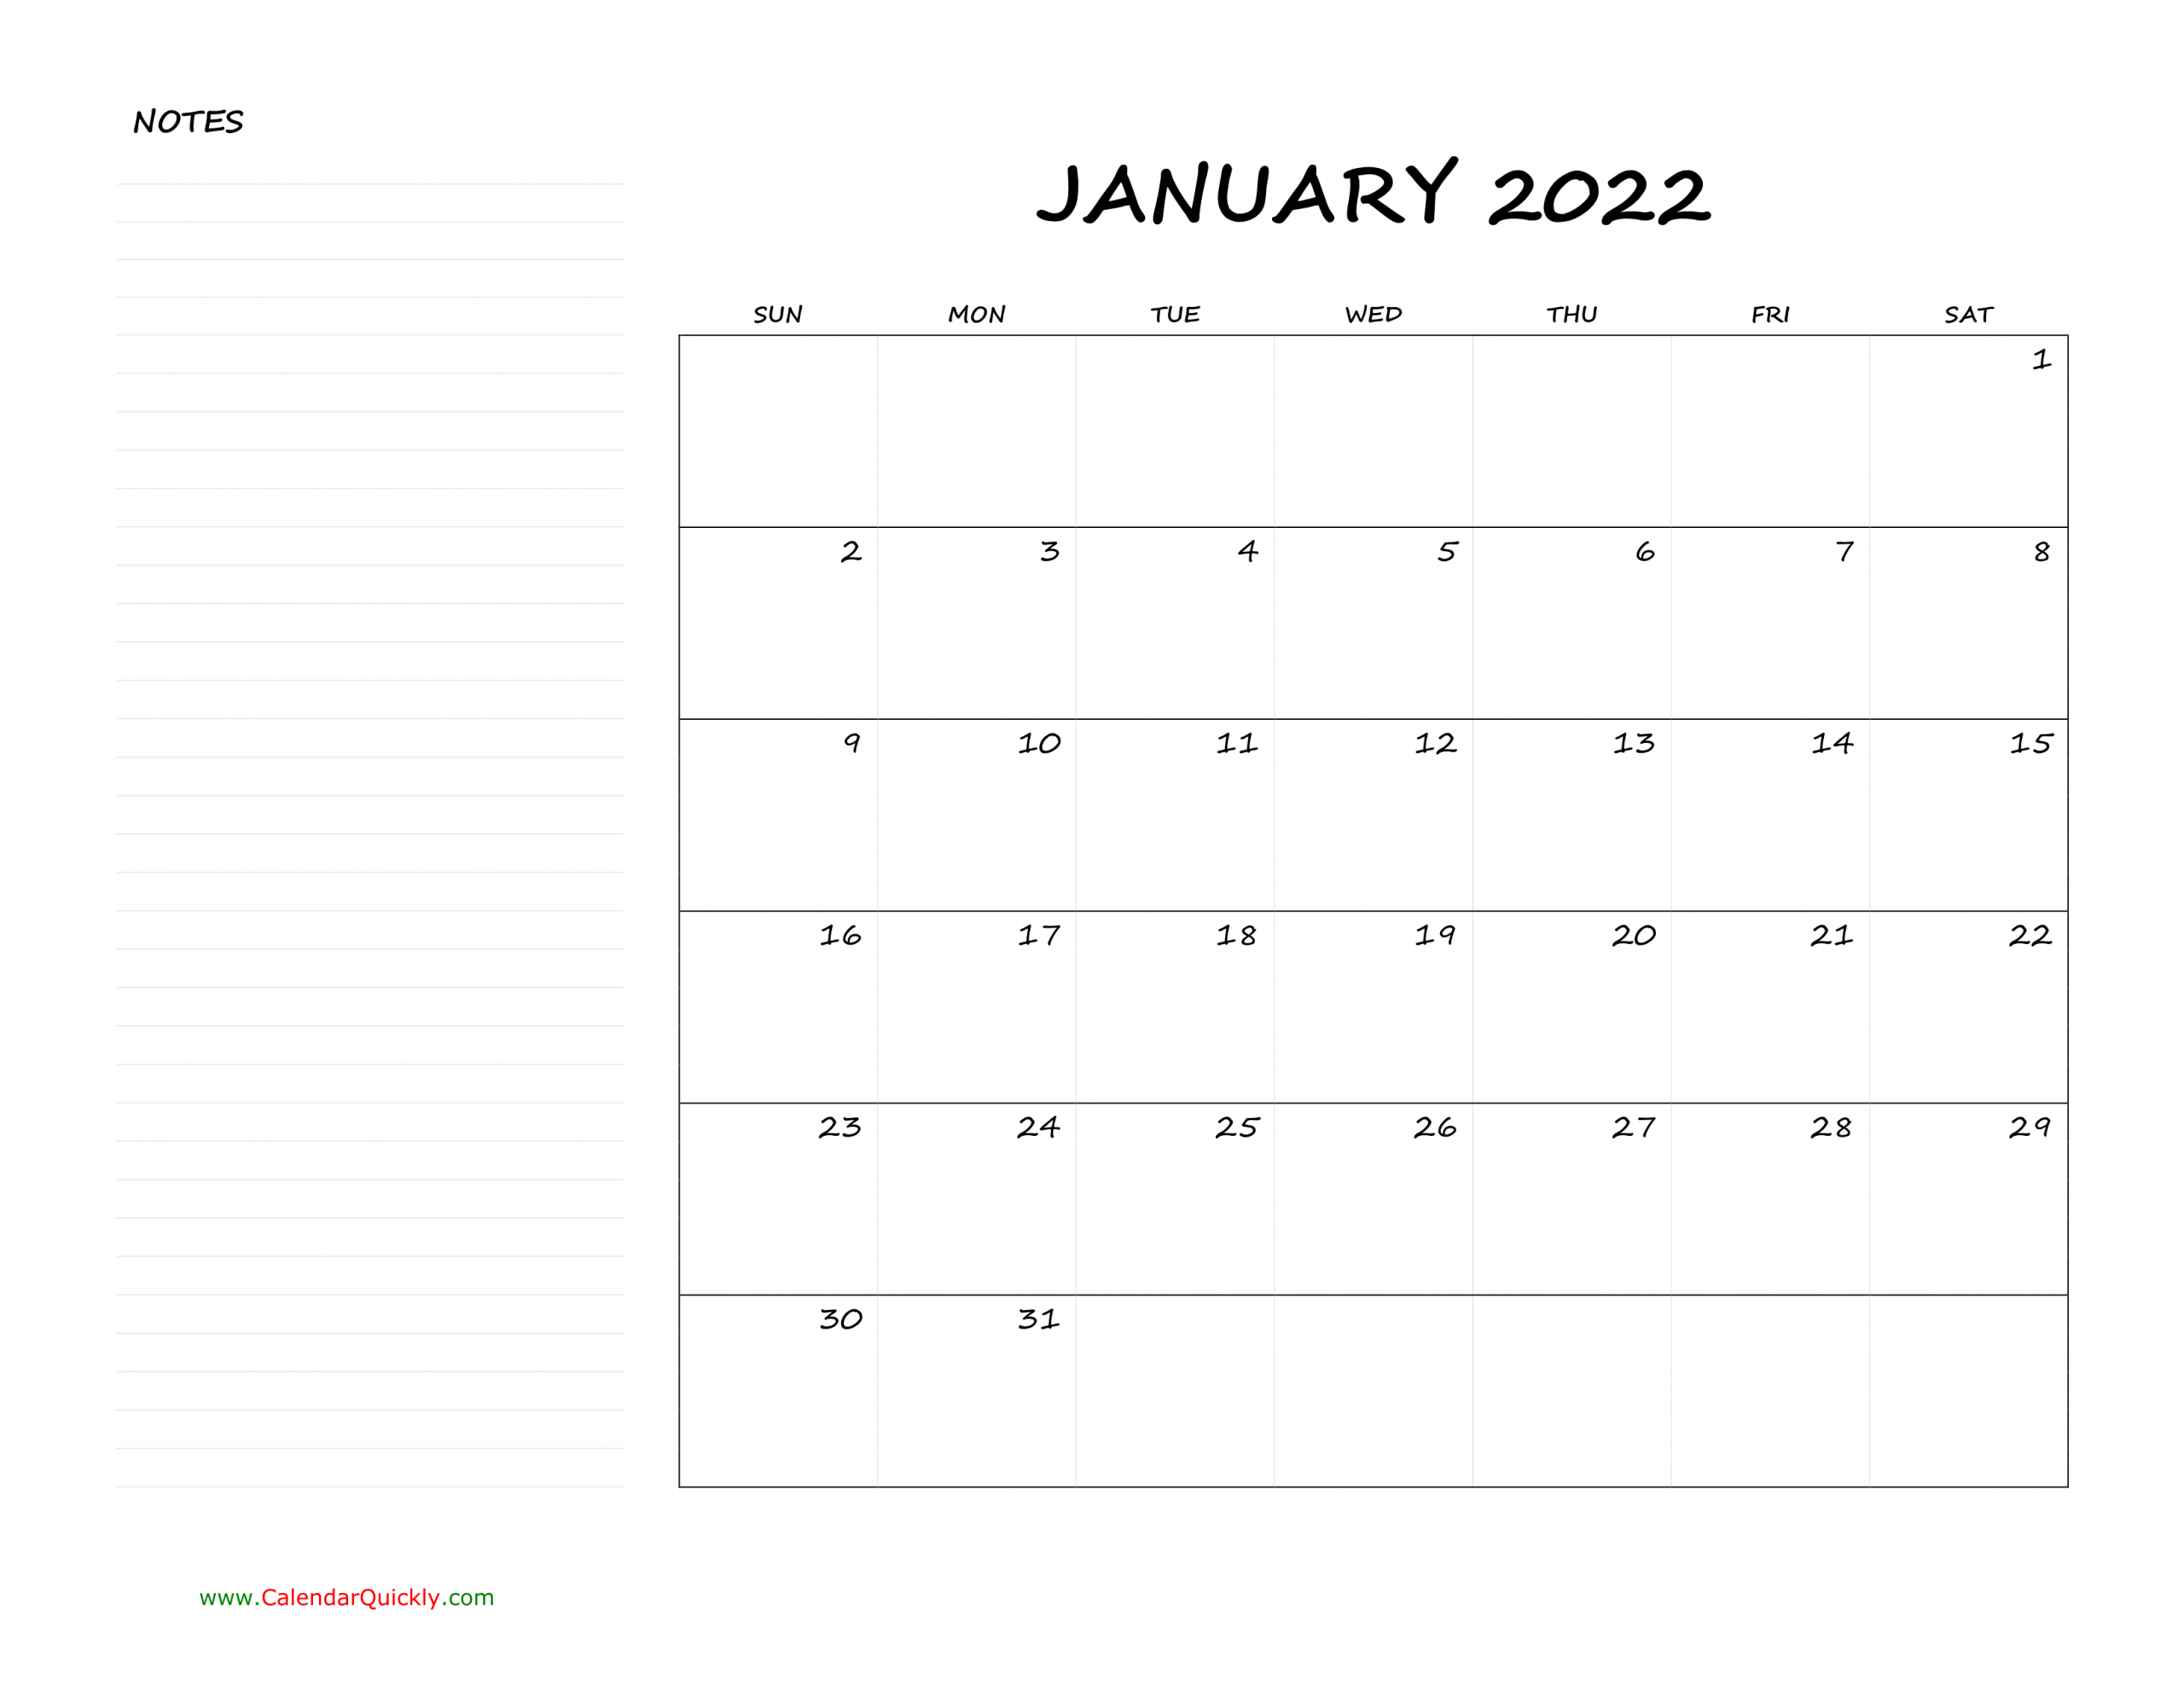 Monthly Blank Calendar 2022 With Notes | Calendar Quickly